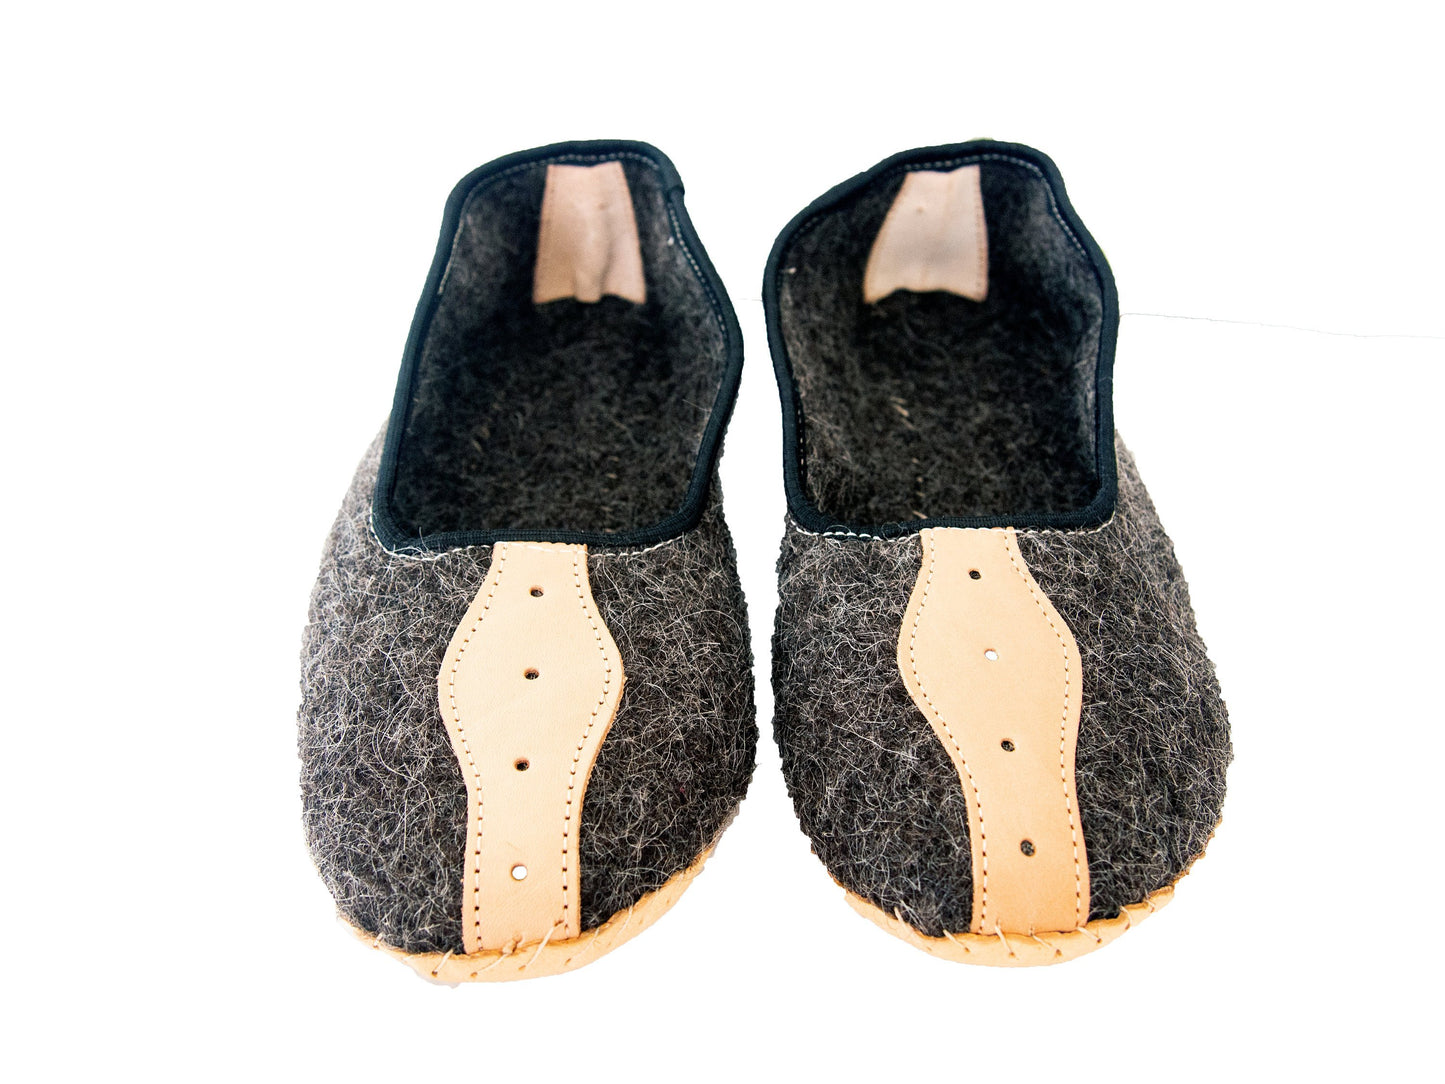 Mens Felt and Real Leather Slippers.